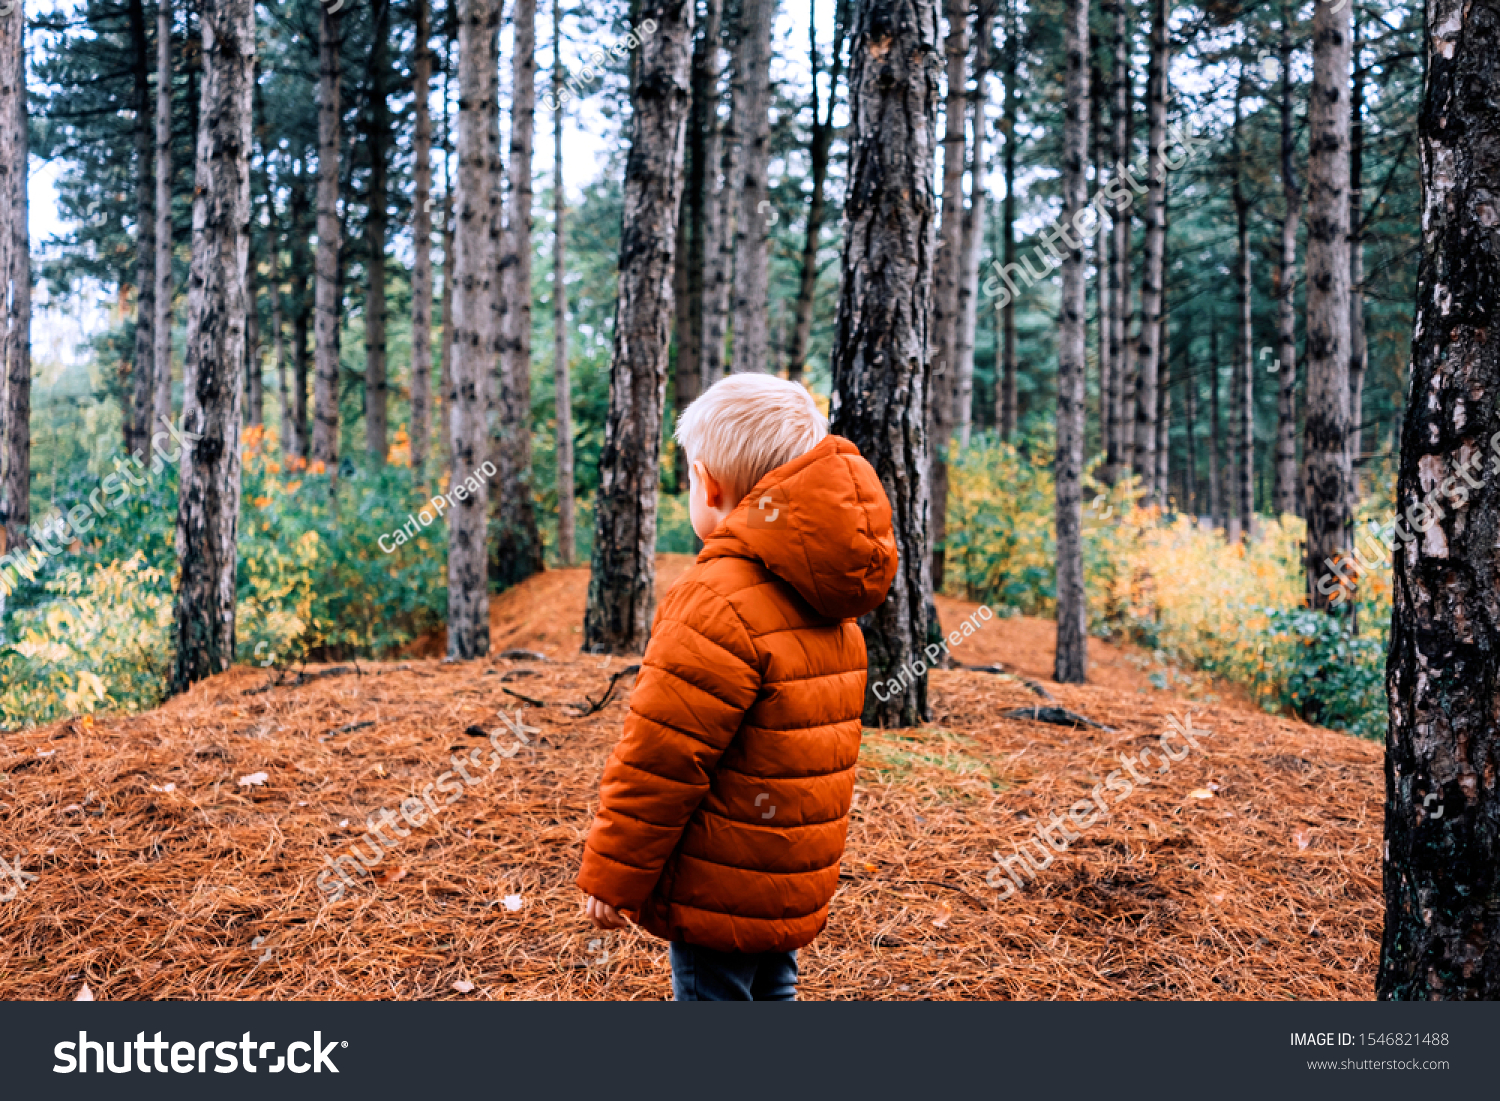 child in the forest looking at the nature in a green, orange and brown pallet colors #1546821488